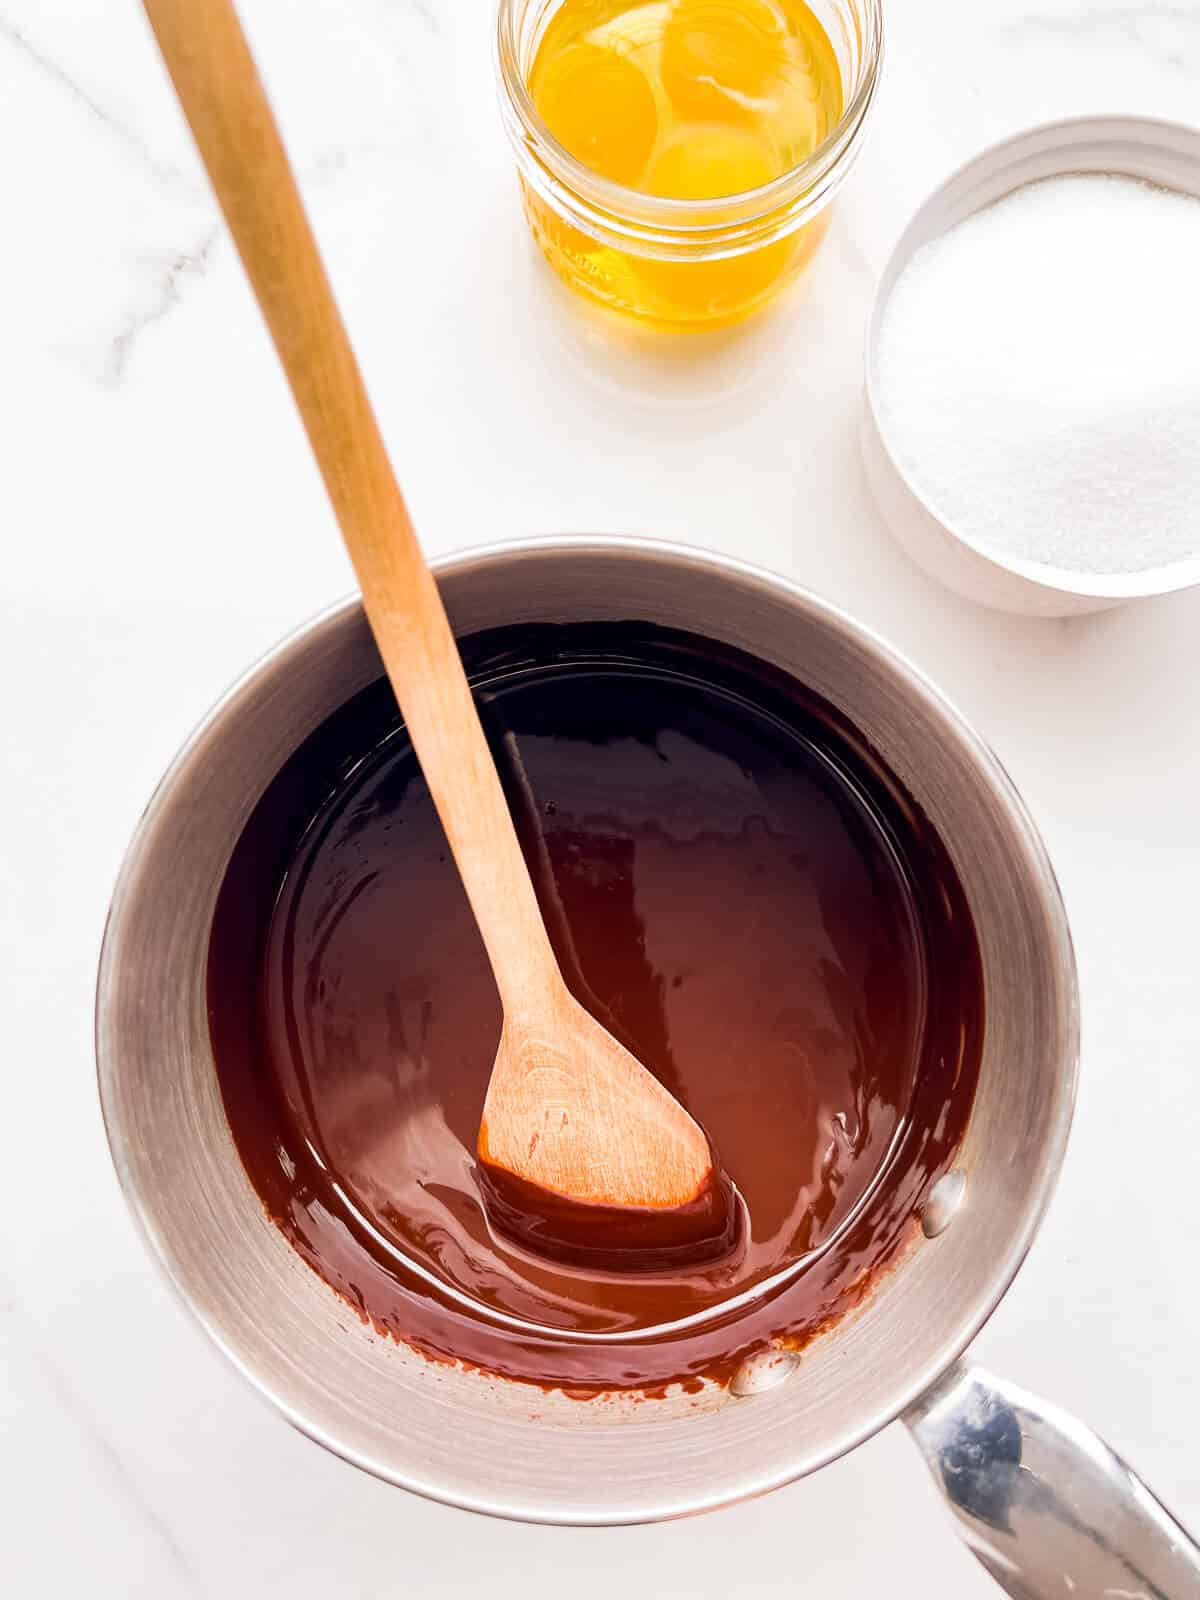 Dark chocolate and butter melted together to make brownie batter.